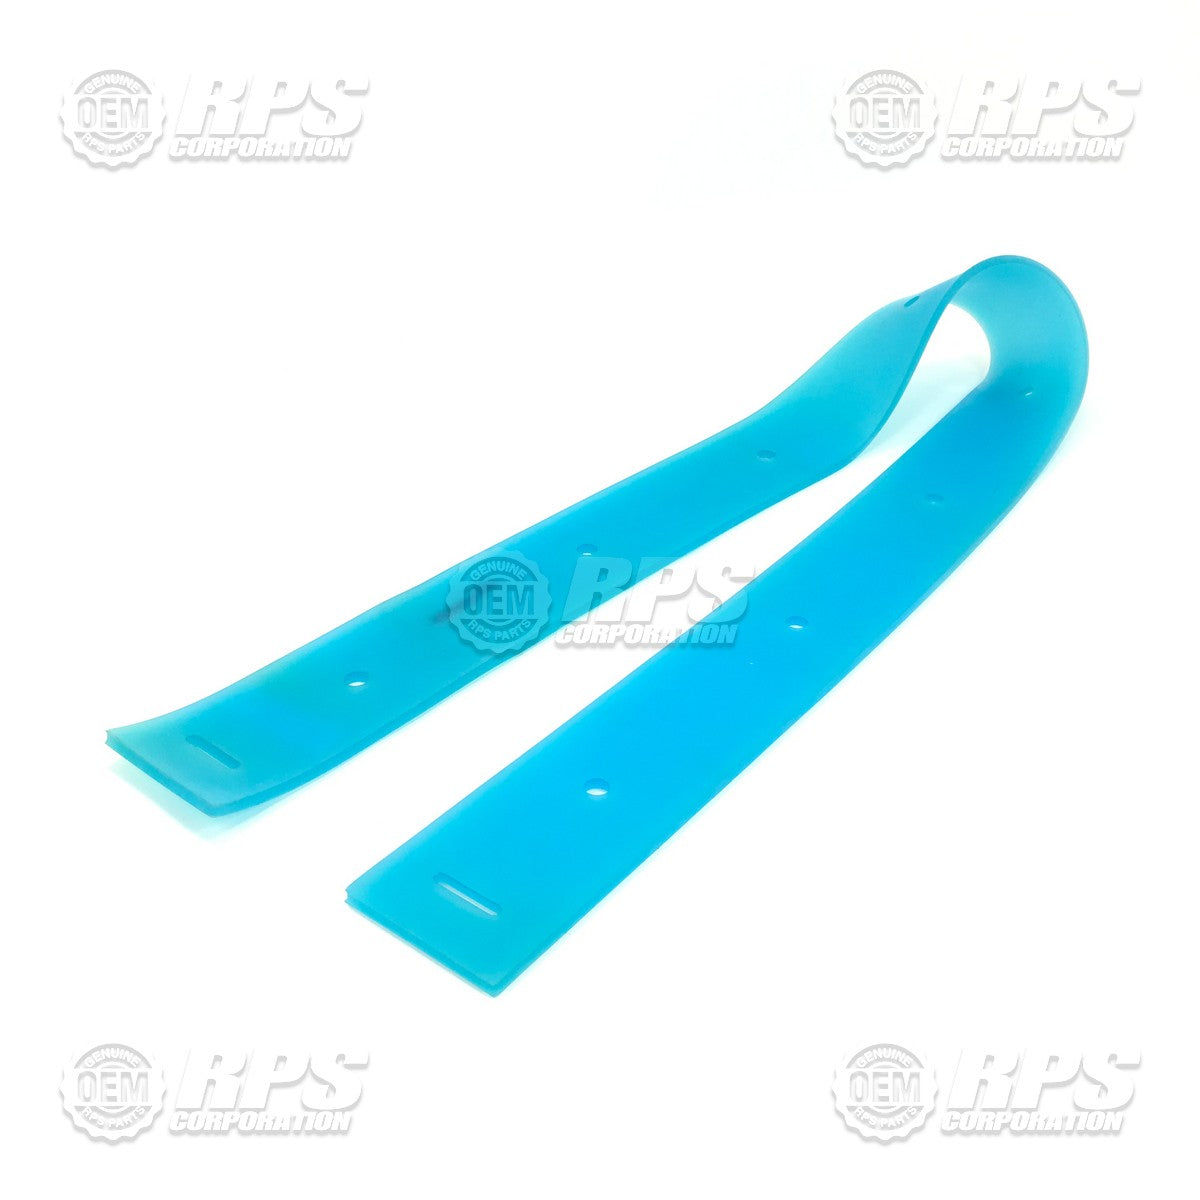 FactoryCat/Tomcat 370-756U, Squeegee Blade,Rear,Urethane Clear,Fits 60"